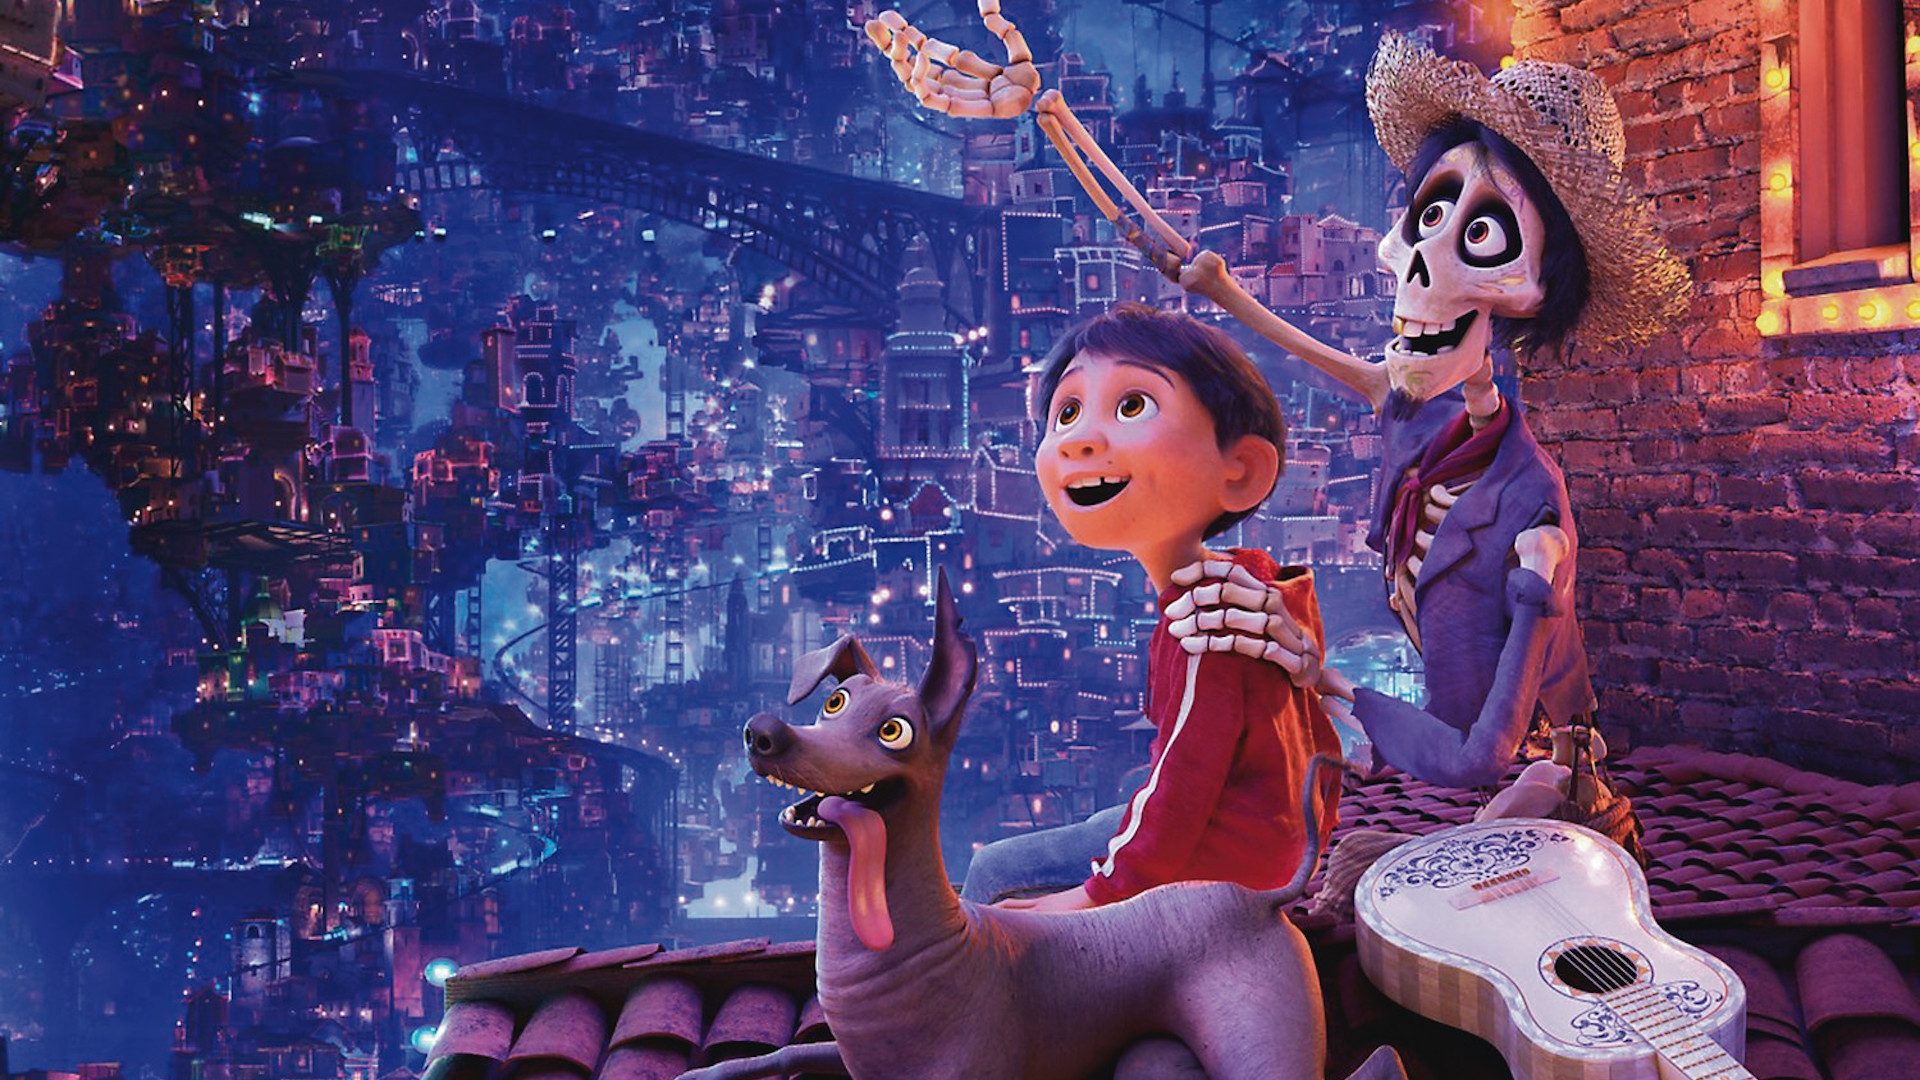 A scene from the Pixar movie, Coco